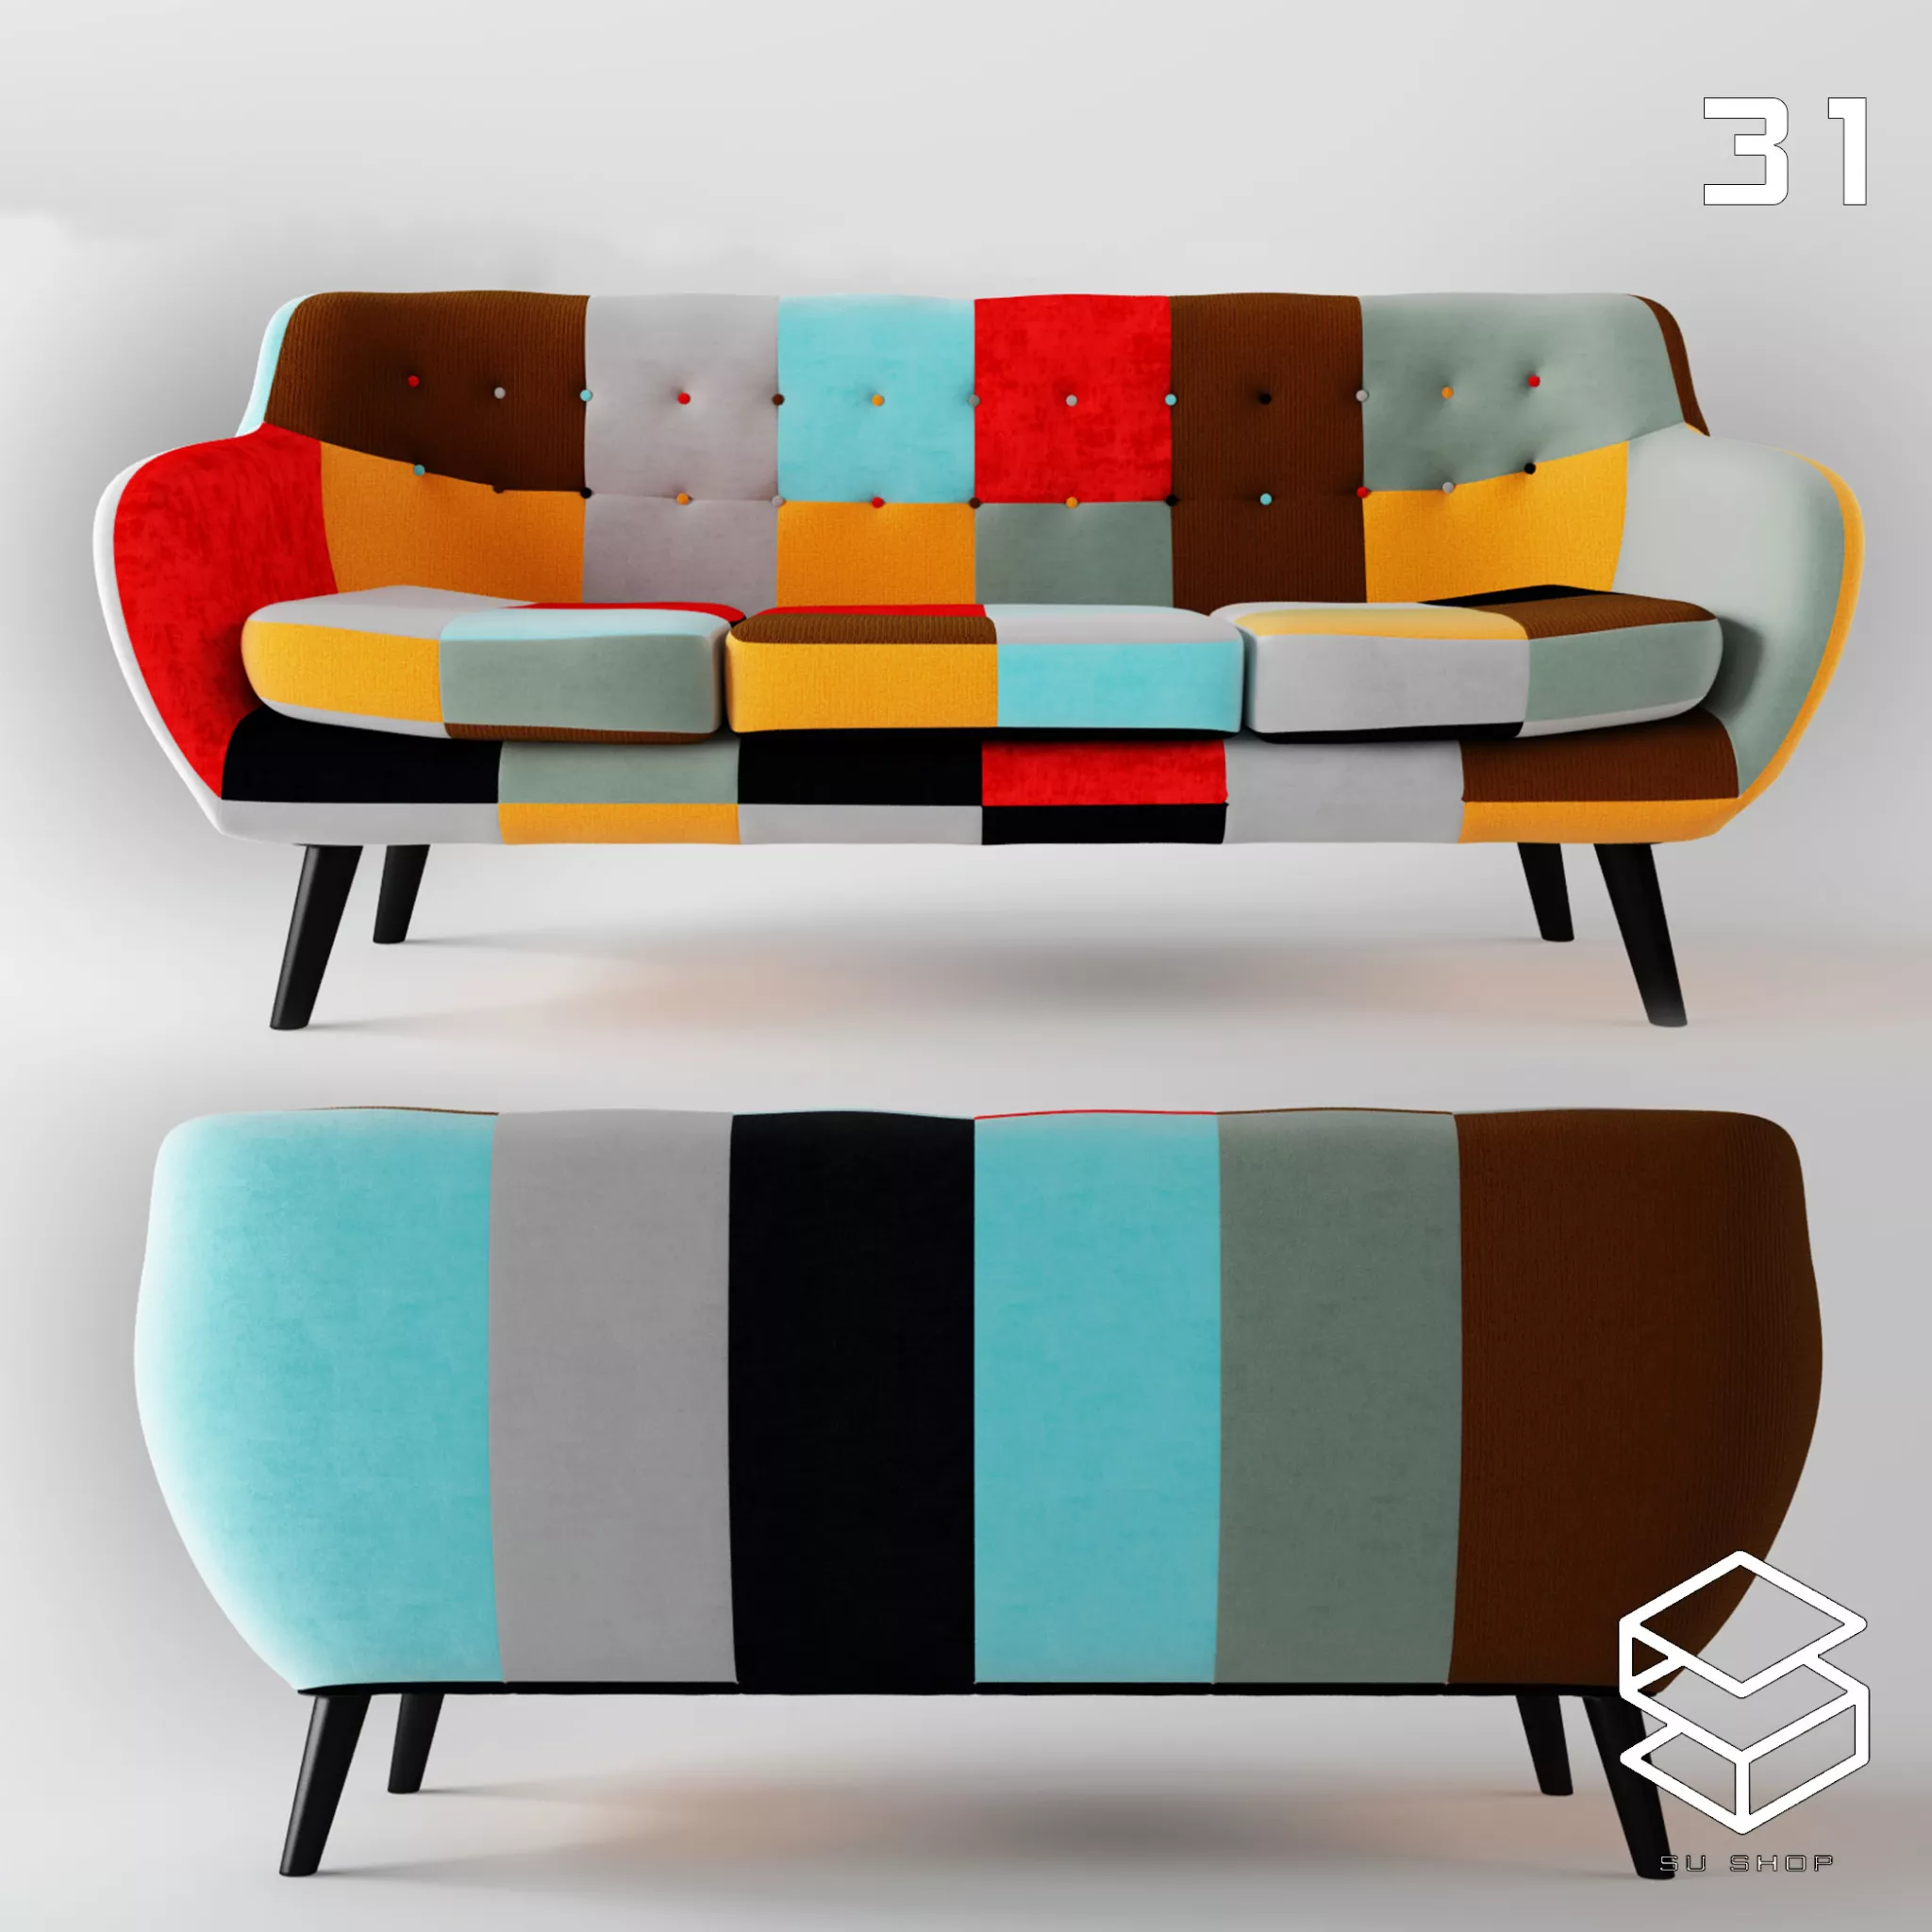 MODERN SOFA - SKETCHUP 3D MODEL - VRAY OR ENSCAPE - ID13619